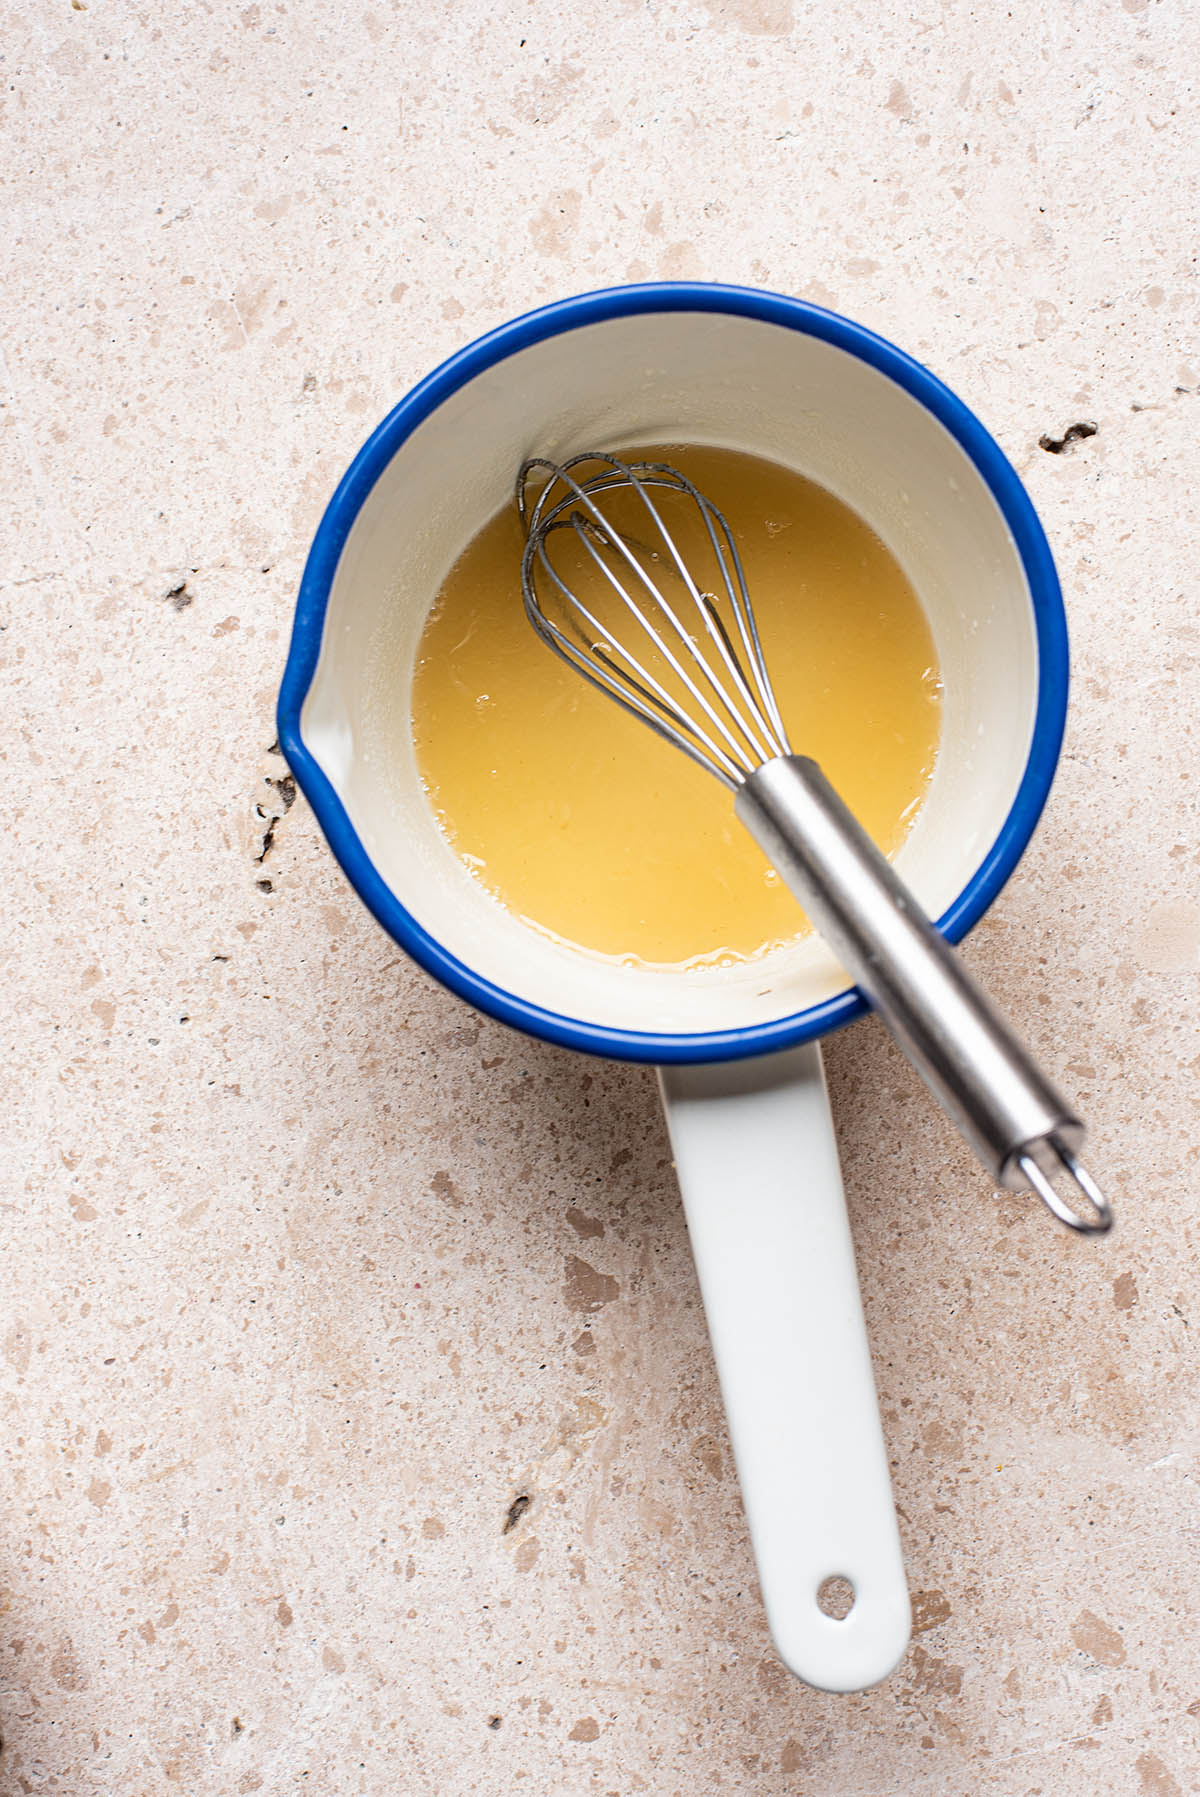 A small saucepan holding a whisk and a yellow lemon and honey mixture.